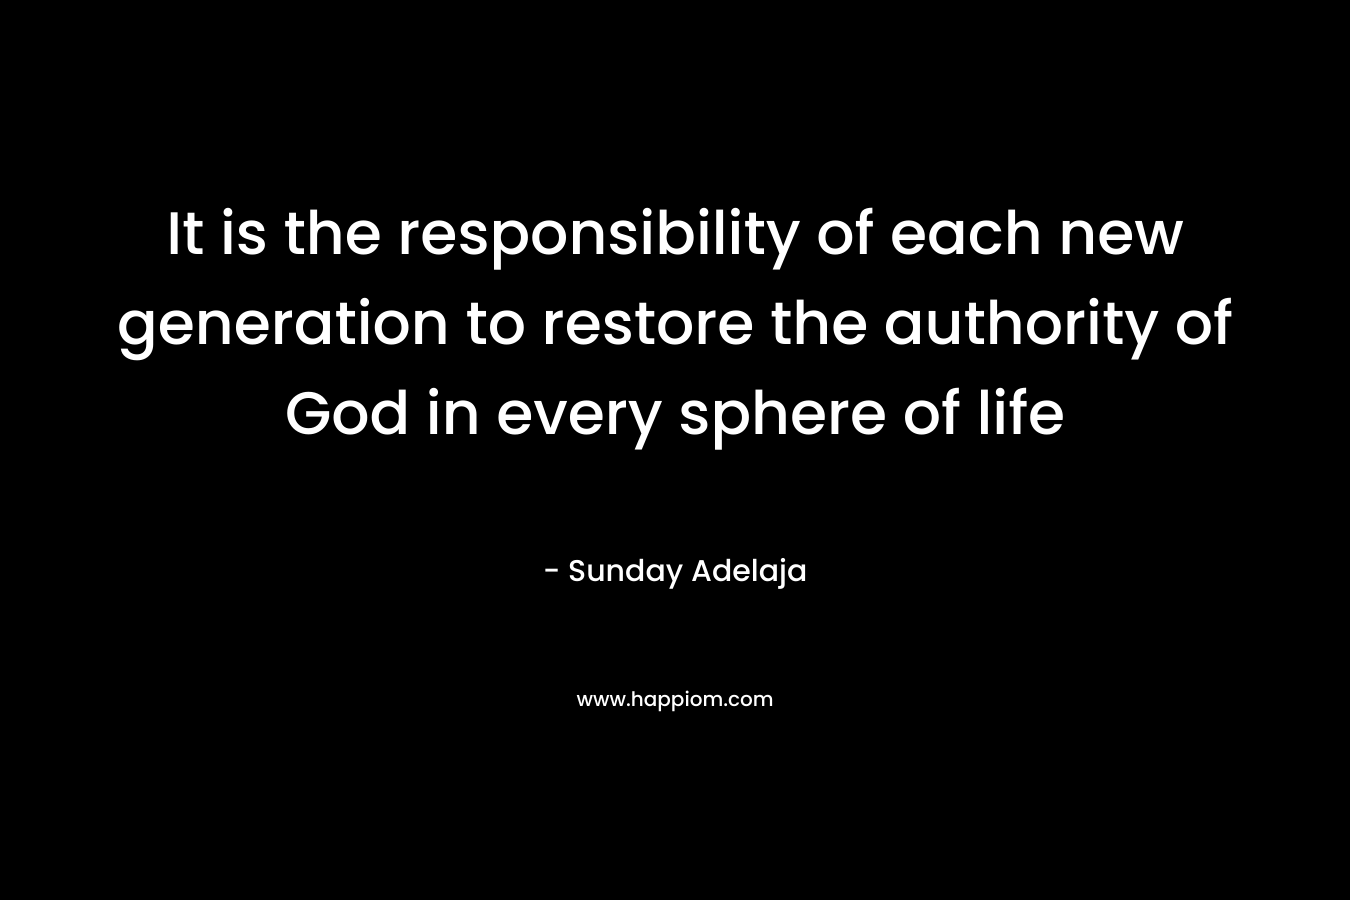 It is the responsibility of each new generation to restore the authority of God in every sphere of life – Sunday Adelaja